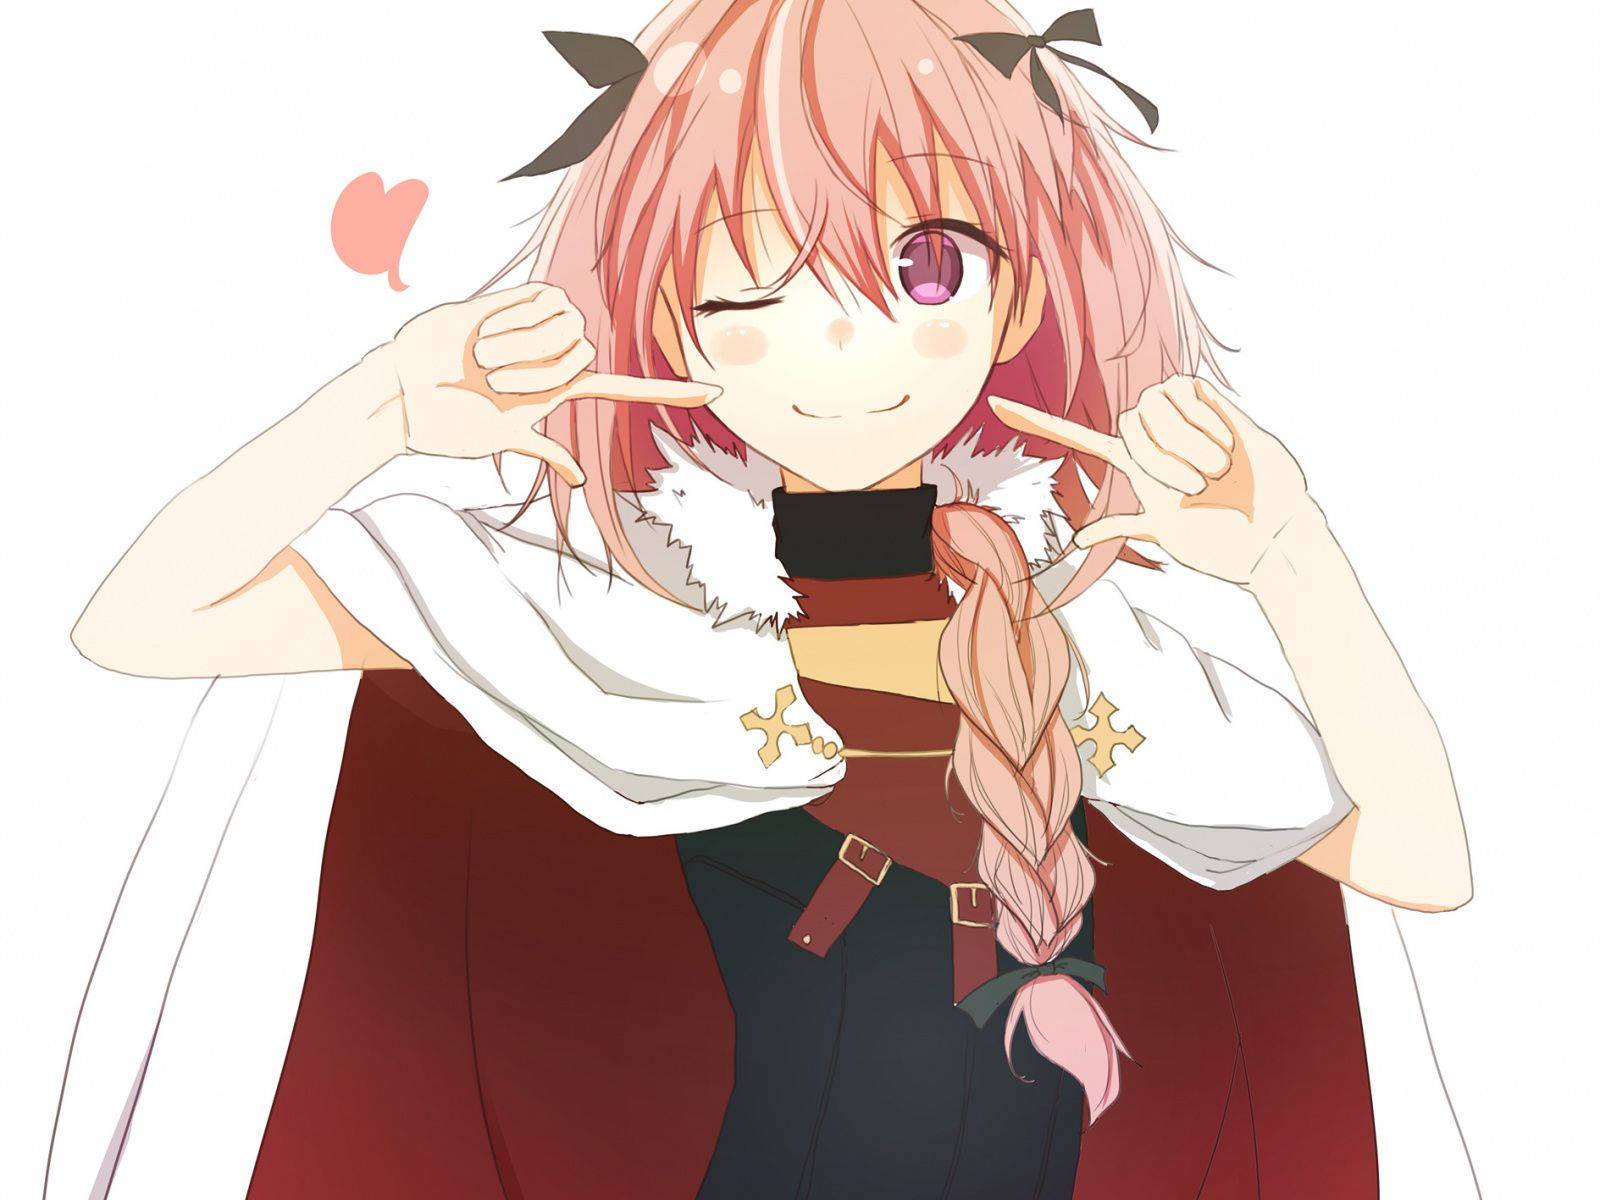 1600X1200 Astolfo Wallpaper and Background